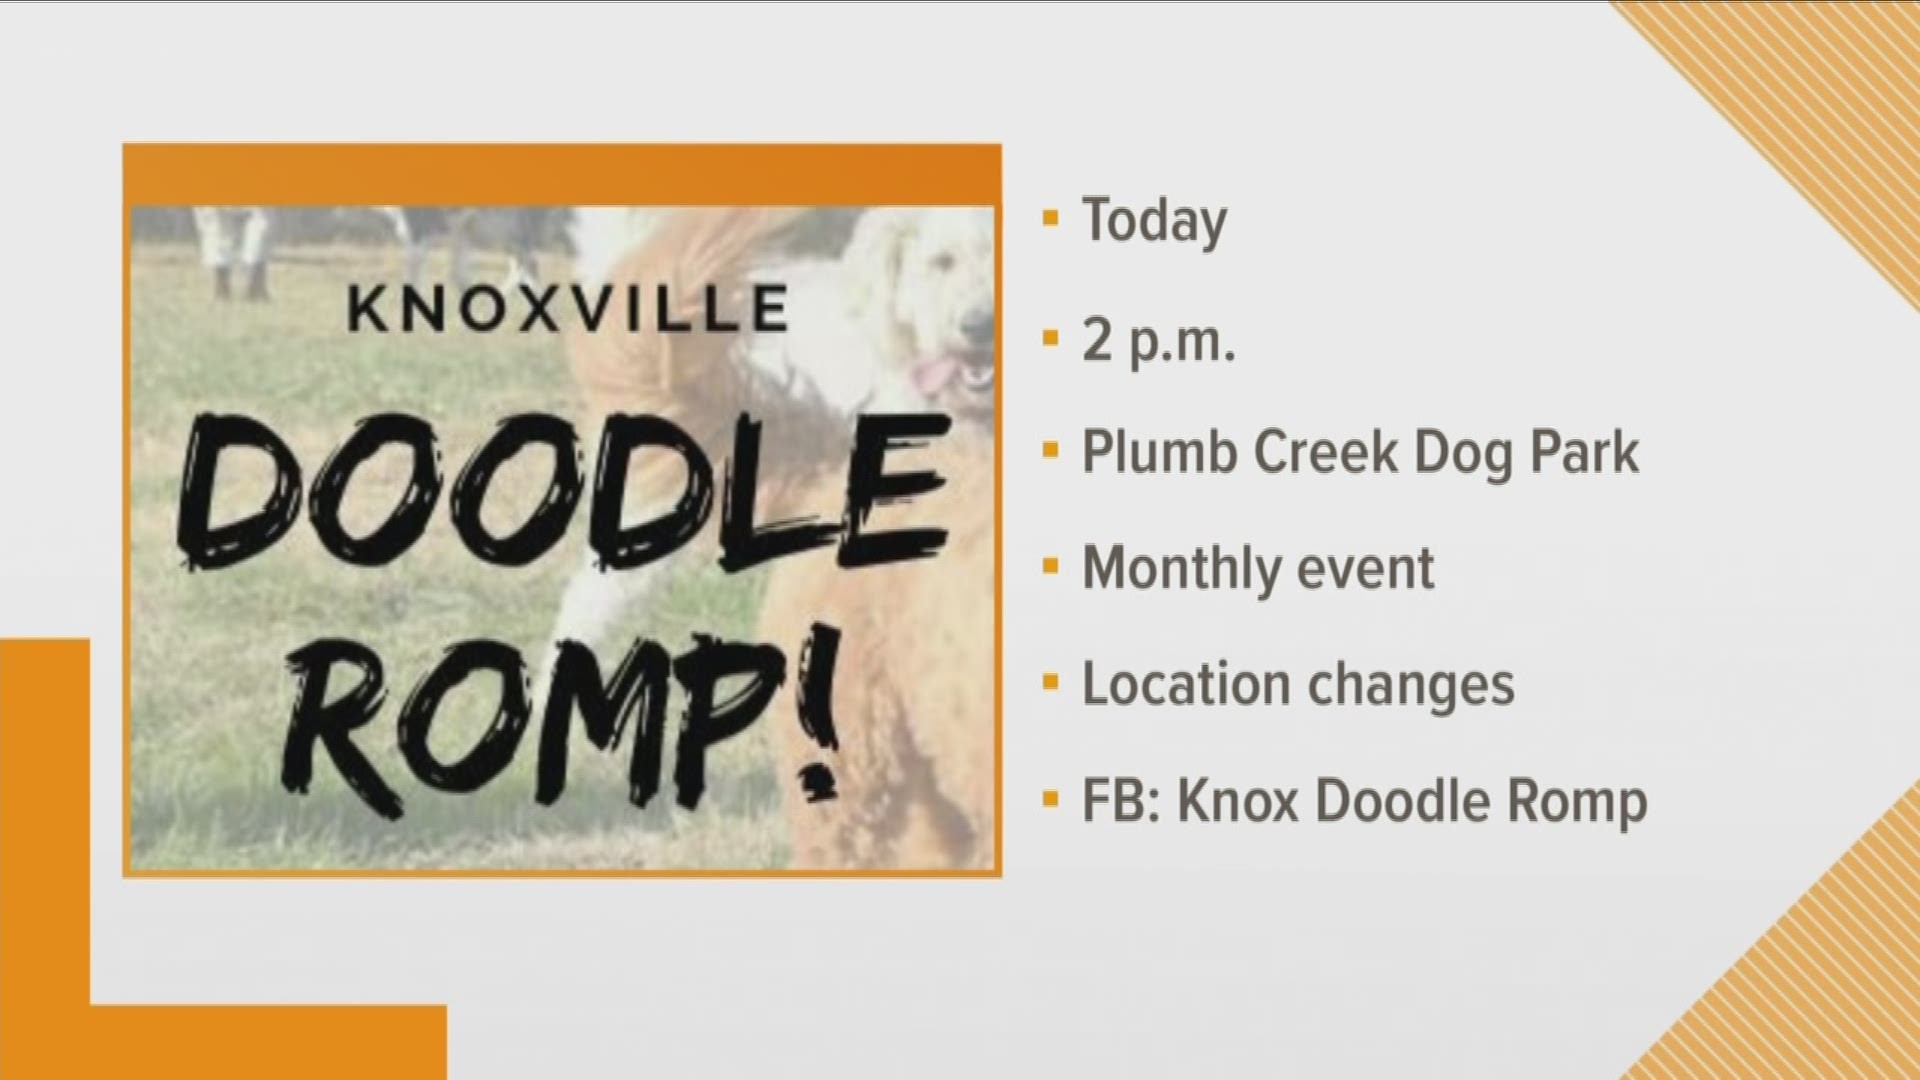 Creator of Knoxville Doodle Romp Jade Kloss is here to talk more about a free monthly event for your furry friends.